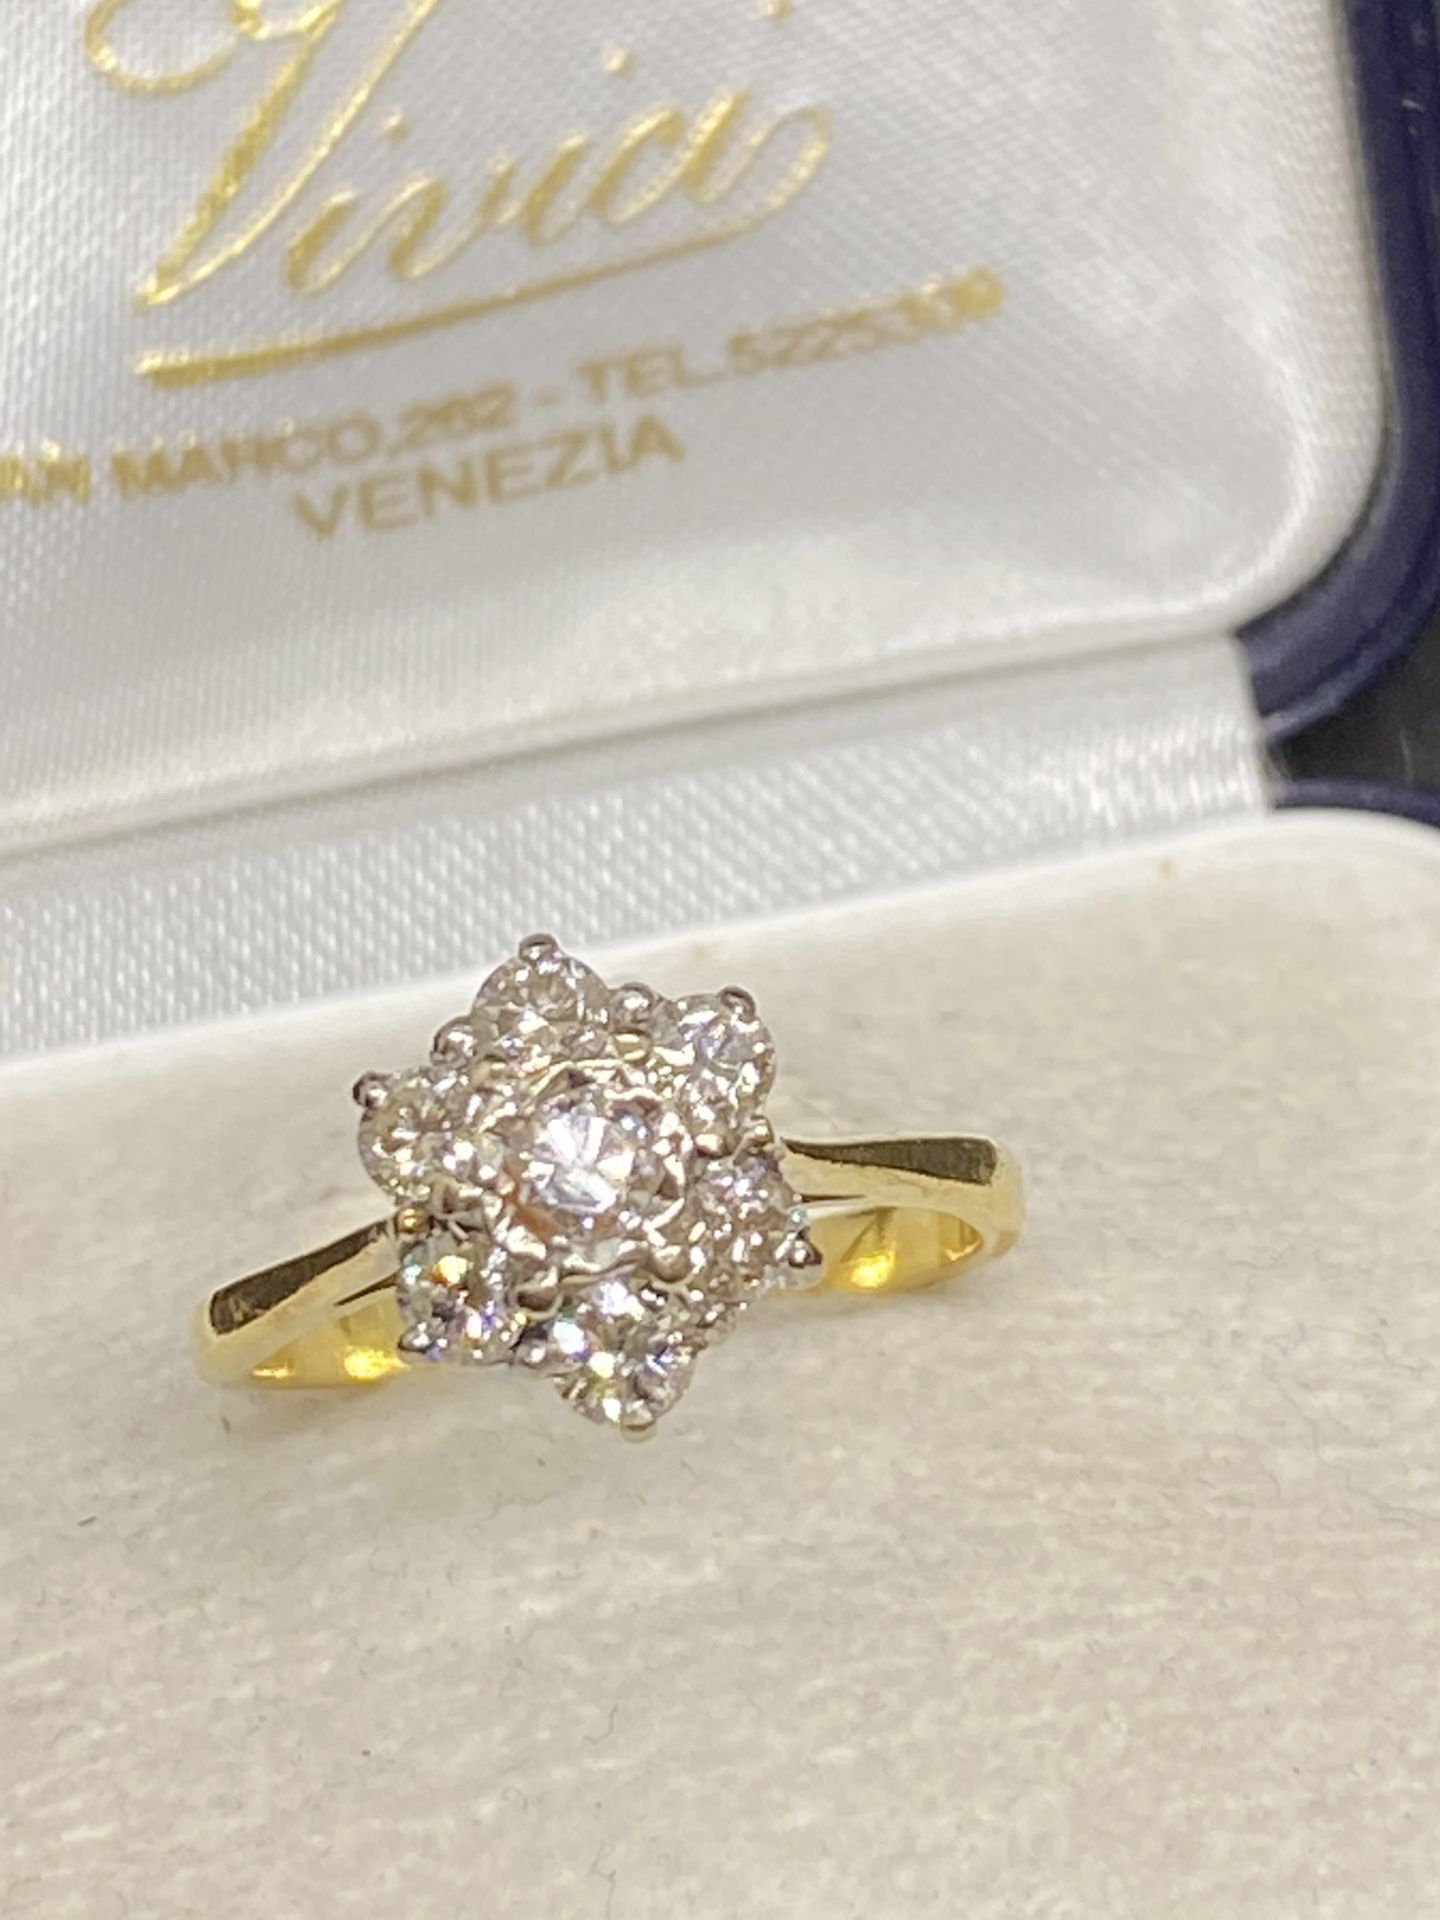 0.65ct I/VSI DIAMOND RING SET IN YELLOW METAL - TESTED AS 18ct GOLD - 3.5 GRAMS - Image 2 of 4